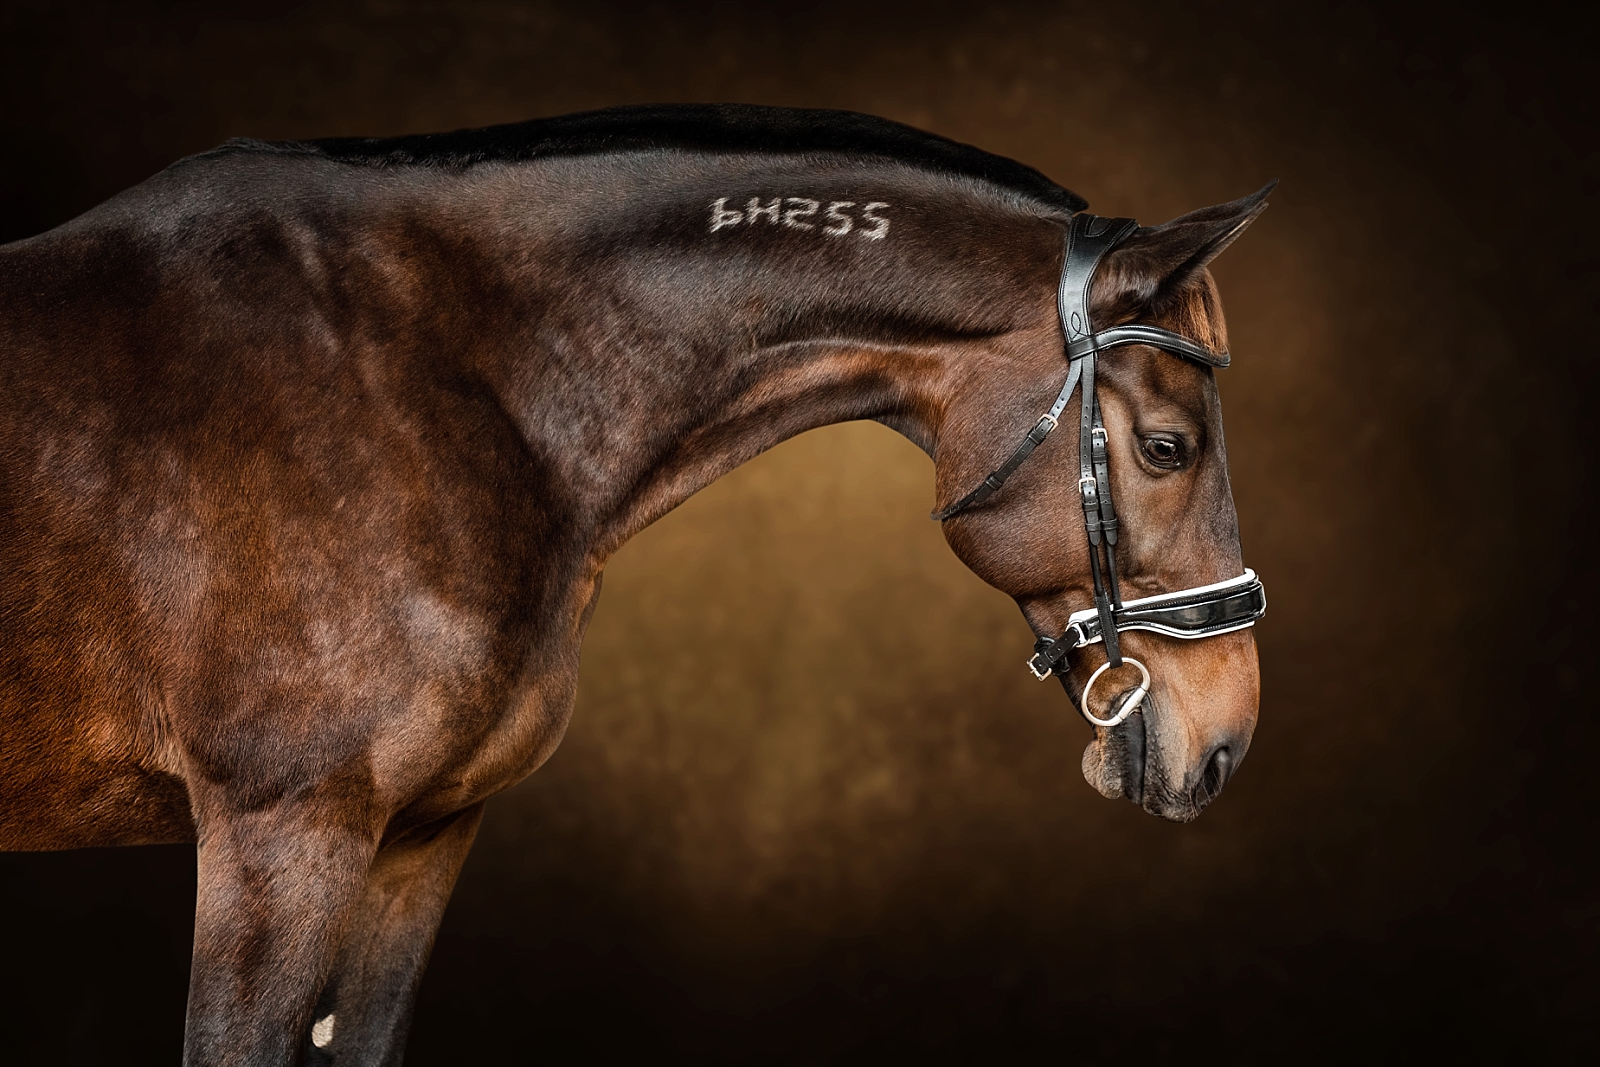 Standardbred horse with tattoo on fine art background with gold hues.